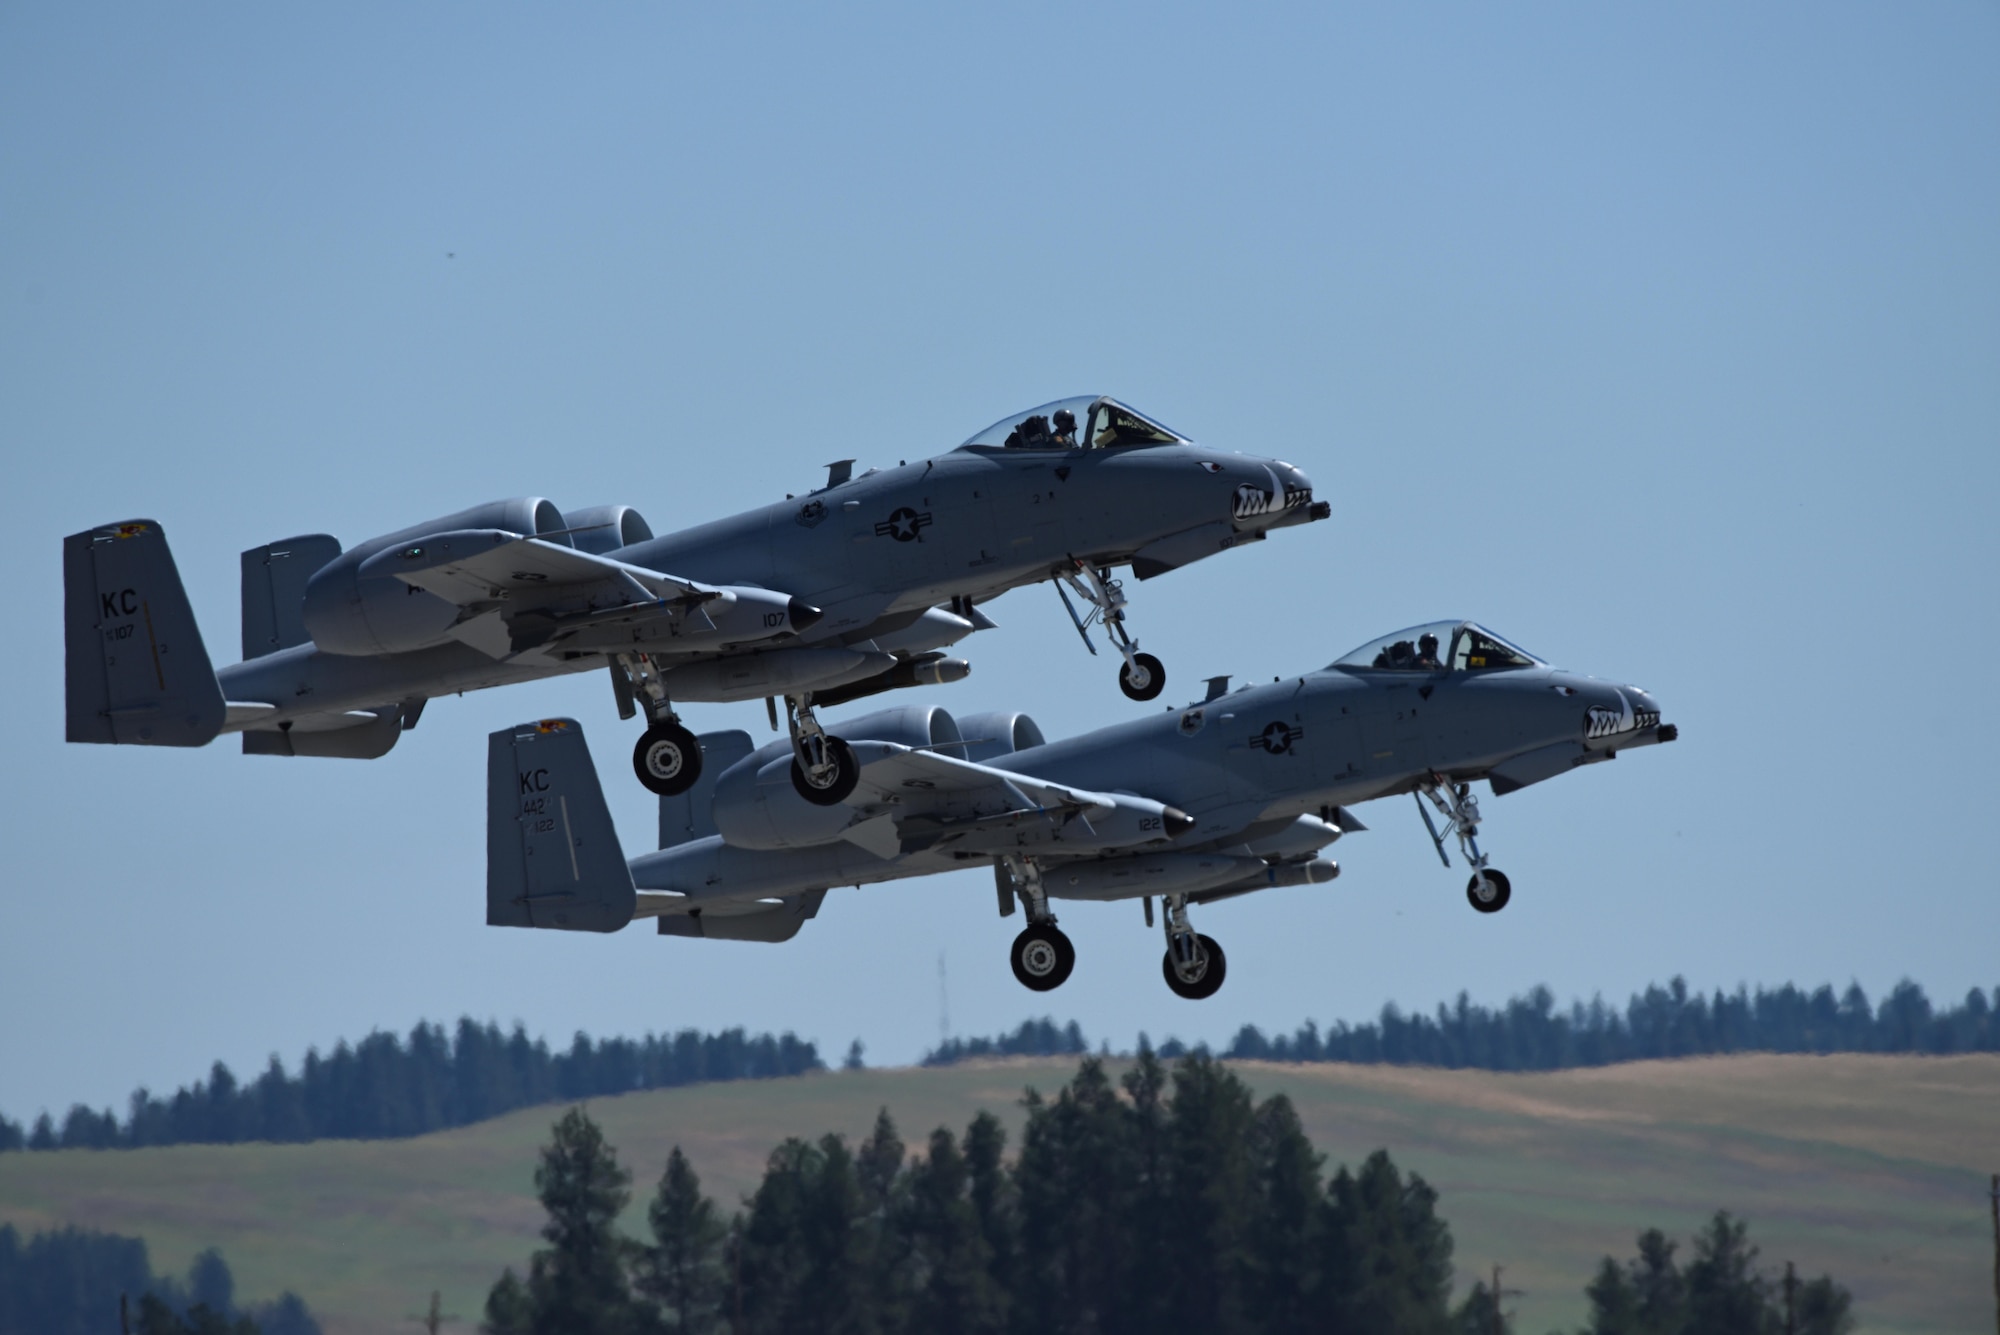 Two A-10 Thunderbolt II aircraft perform during the 2017 Skyfest Air Show and Open House July 29, 2017, at Fairchild Air Force Base, Washington. The A-10 has excellent maneuverability at low air speeds and altitude, and is a highly accurate and survivable weapons-delivery platform. (U.S. Air Force photo/Airman 1st Class Jesenia Landaverde)